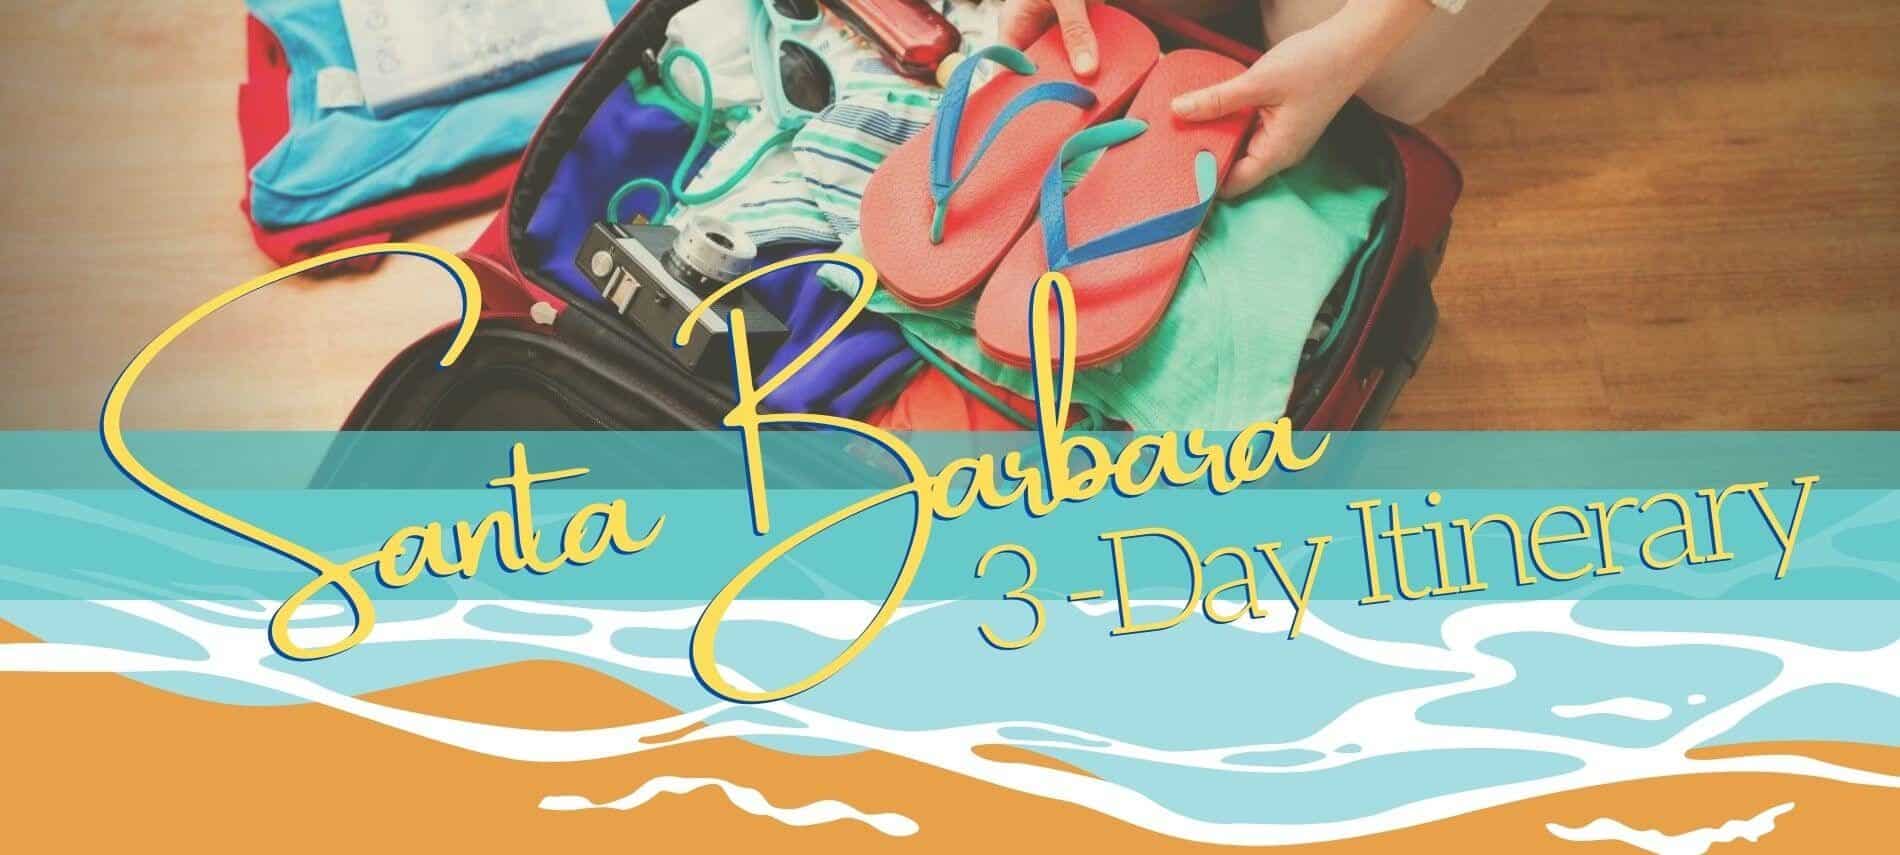 Person packing a bag with flip-flops and text Santa Barbara 3-day itinerary and beach graphics